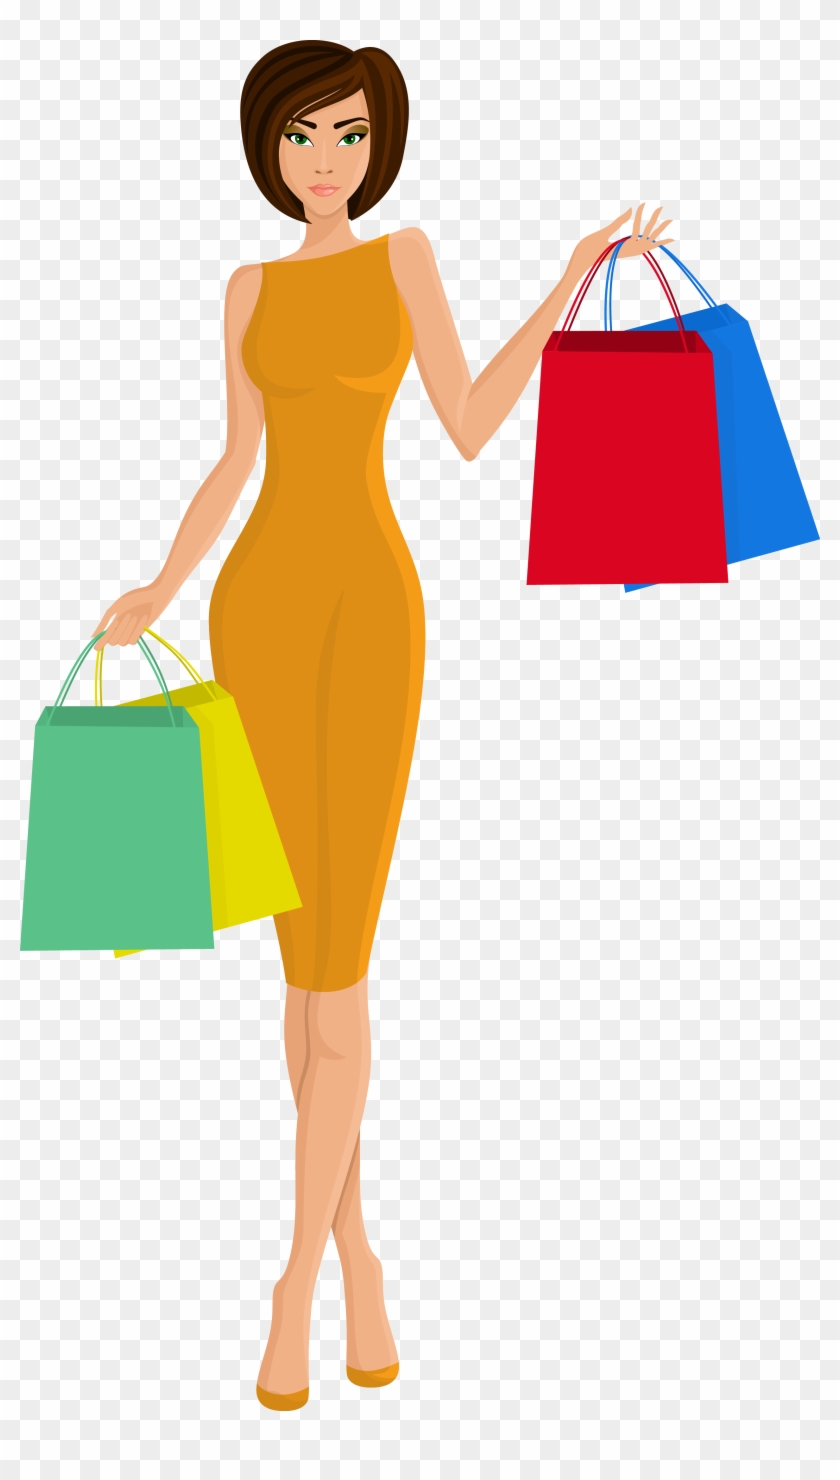 Beautiful Woman Shopping - Woman With Shopping Bags Cartoon - Free  Transparent PNG Clipart Images Download